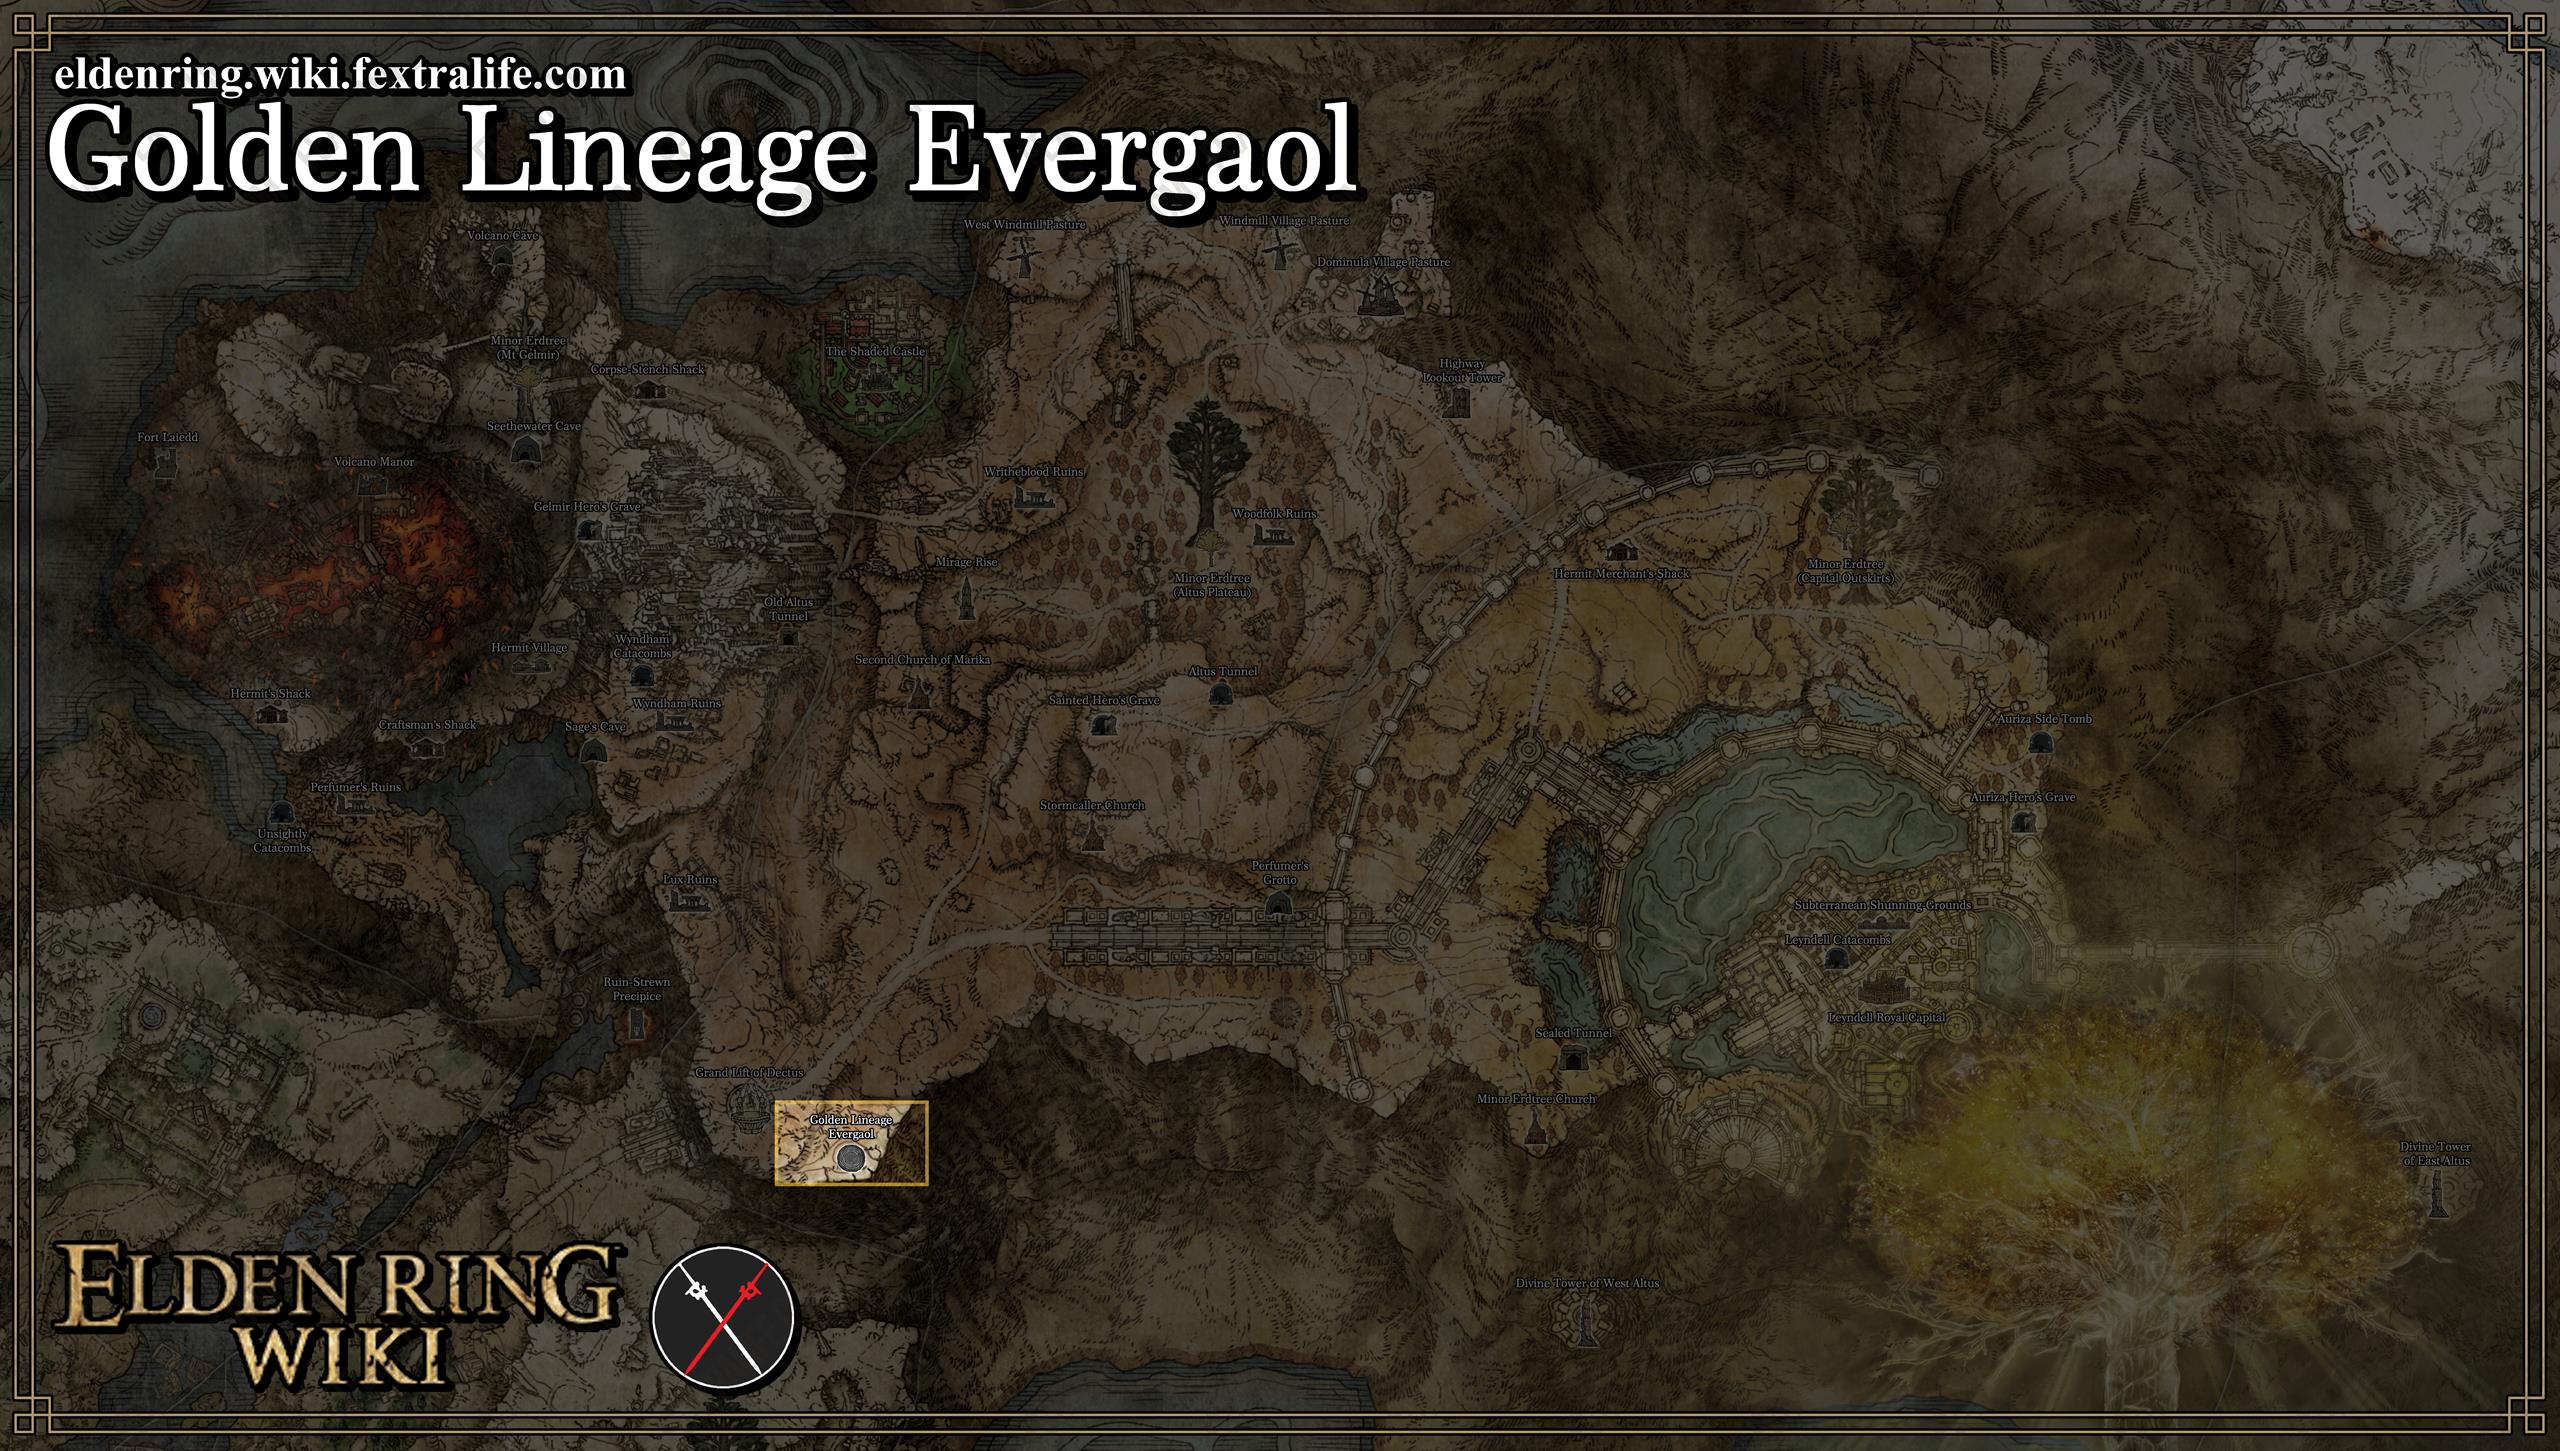 Elden Ring: Where To Find All Evergaols